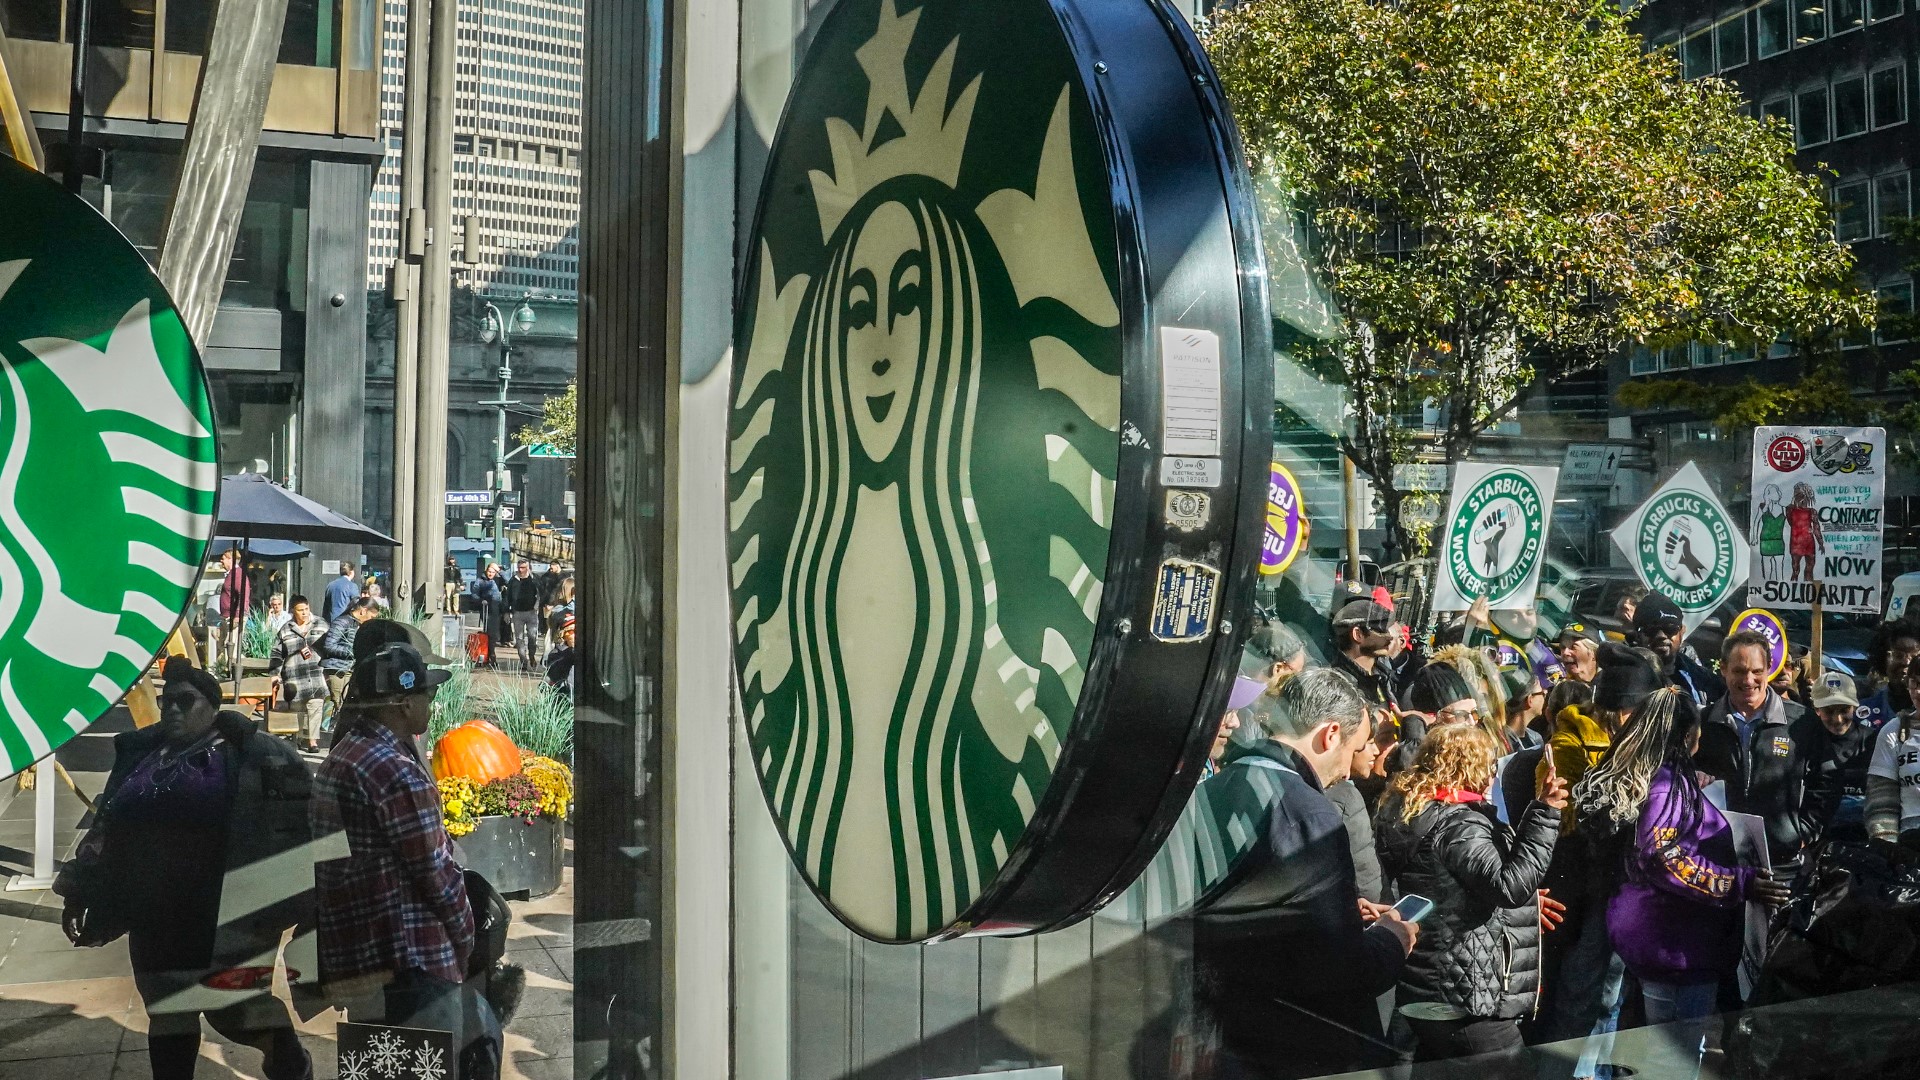 Union workers at a Starbucks in New York City walked off the job and onto the picket line as a part of a nationwide strike Thursday.